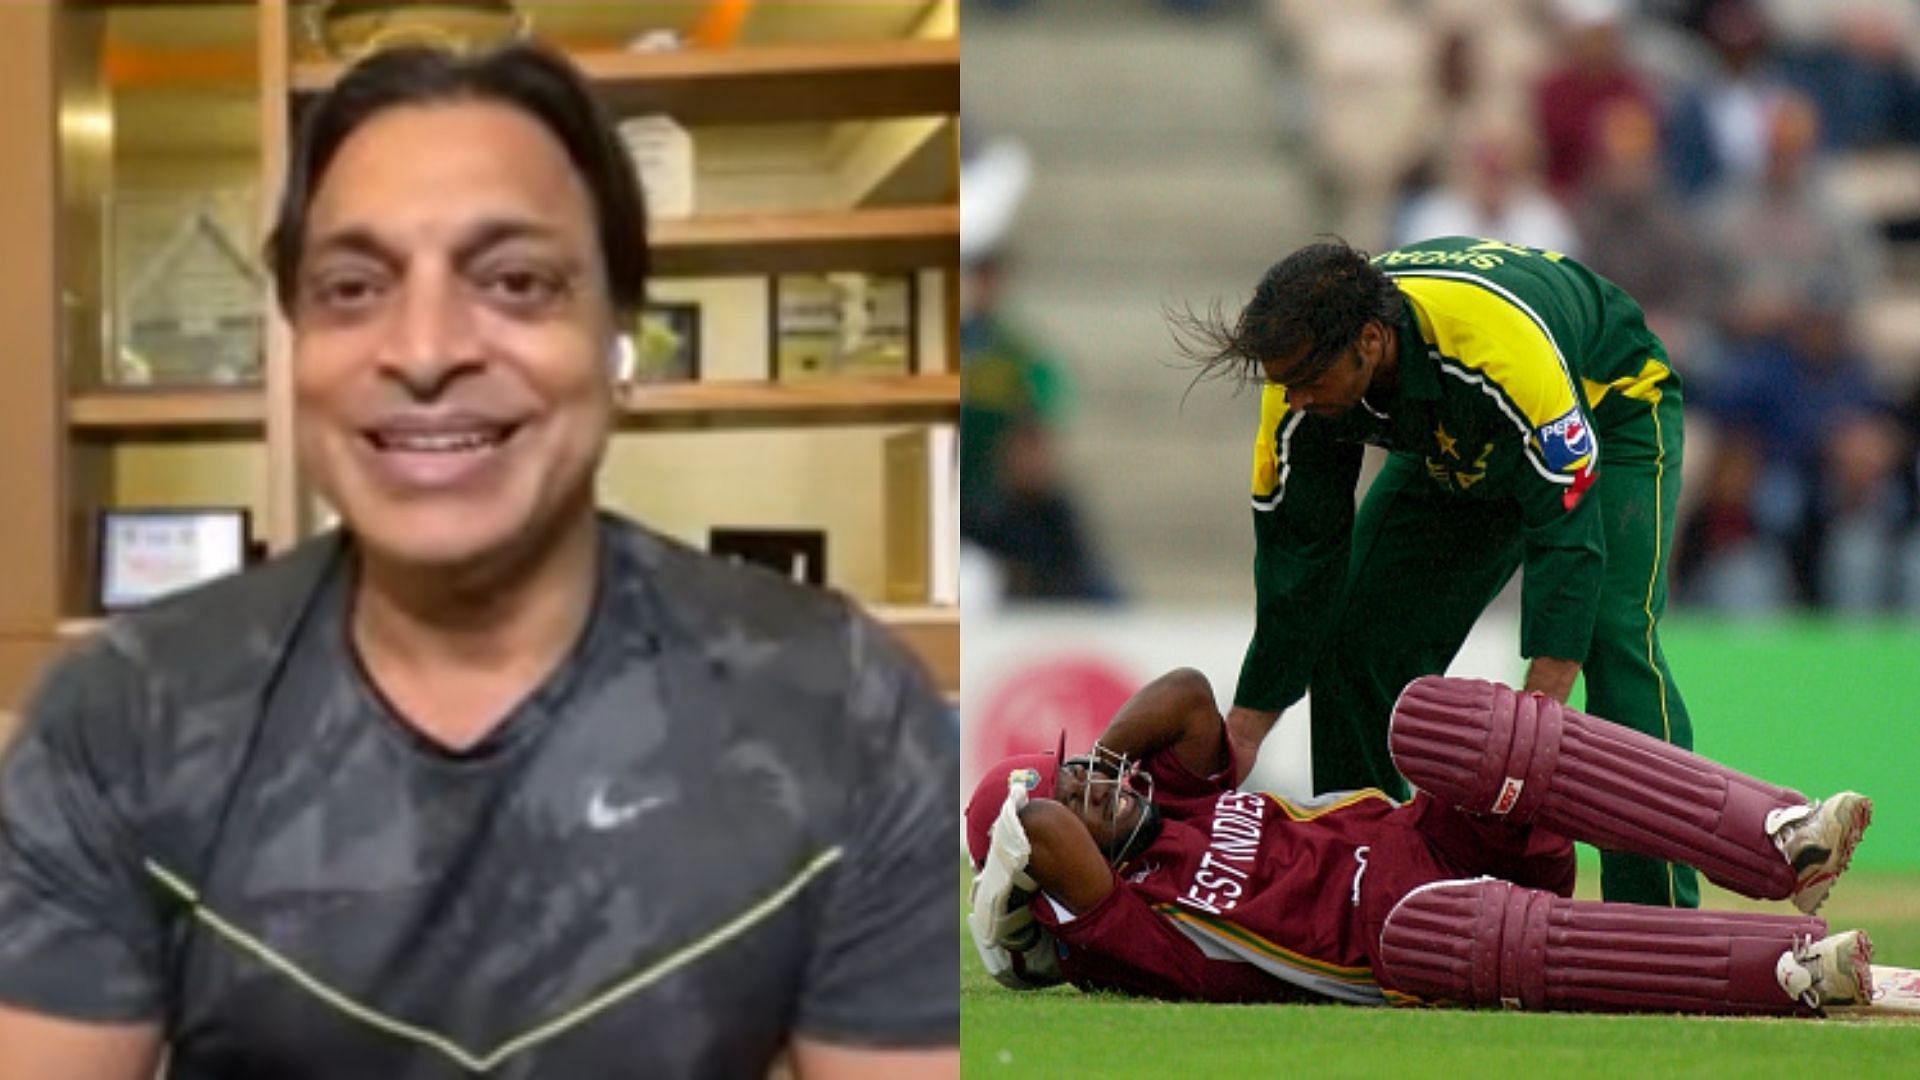 Shoaib Akhtar explained why he loved bowling bouncers consistently. (P.C.:Twitter)